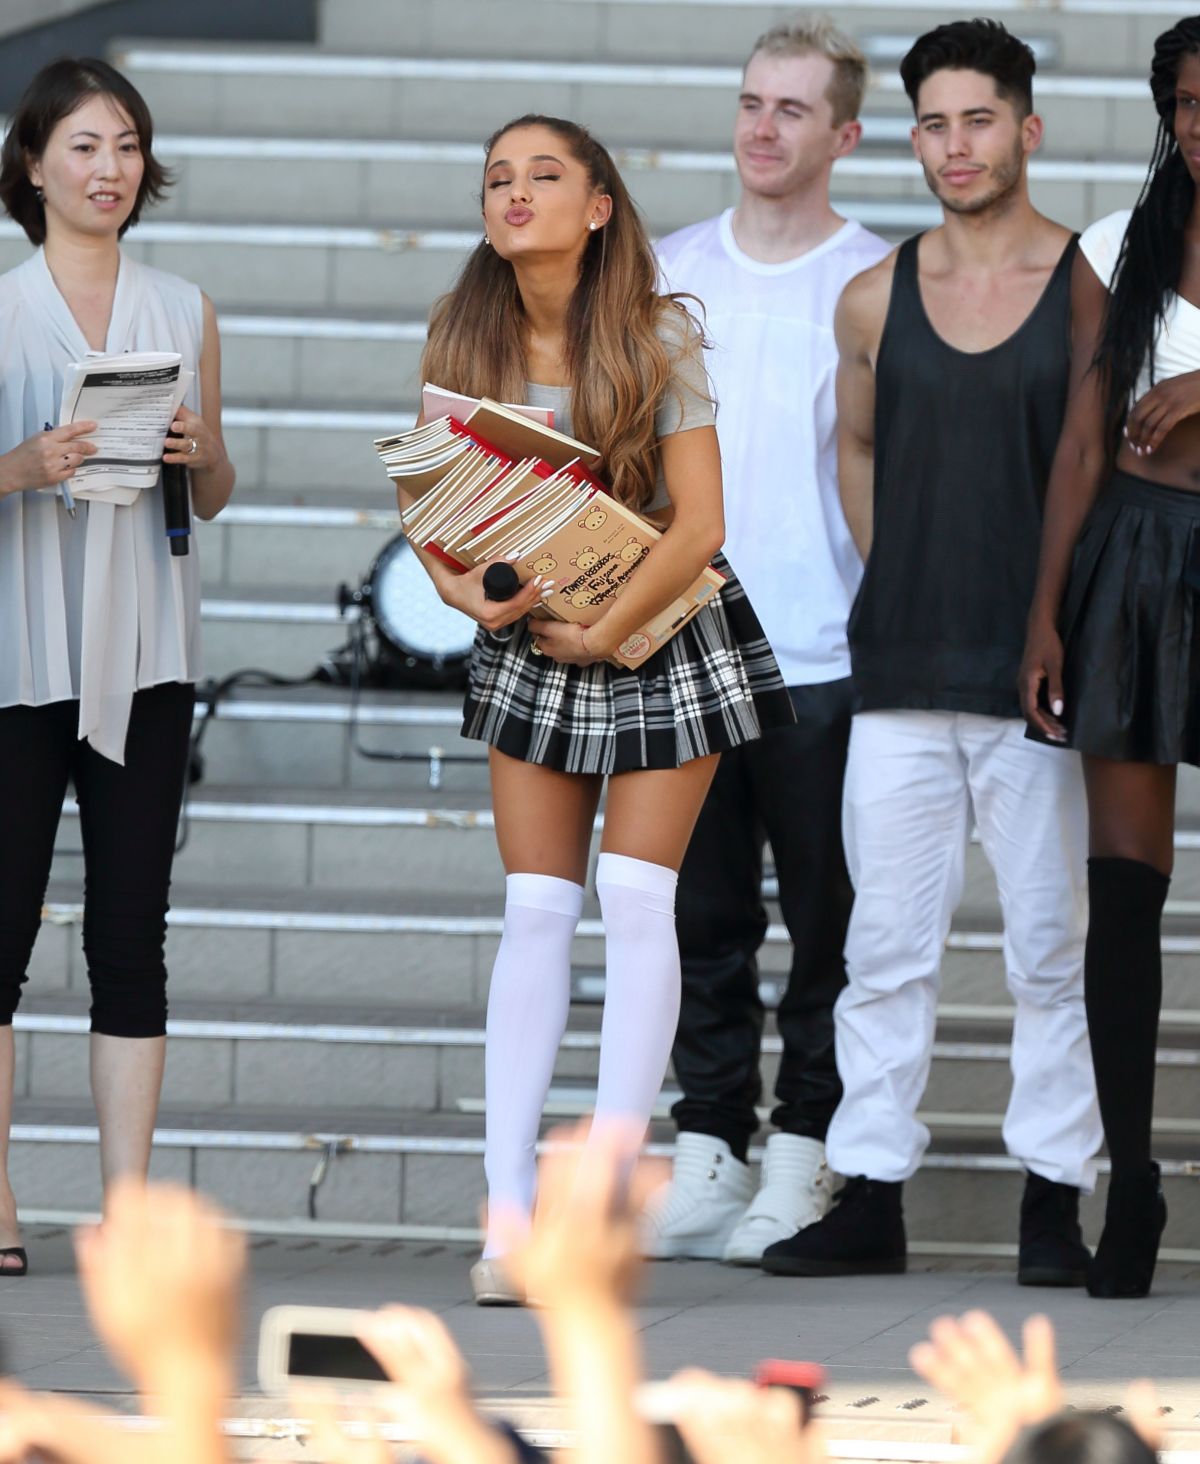 ARIANA GRANDE Promotes Her New Album My Everything in Tokyo – HawtCelebs